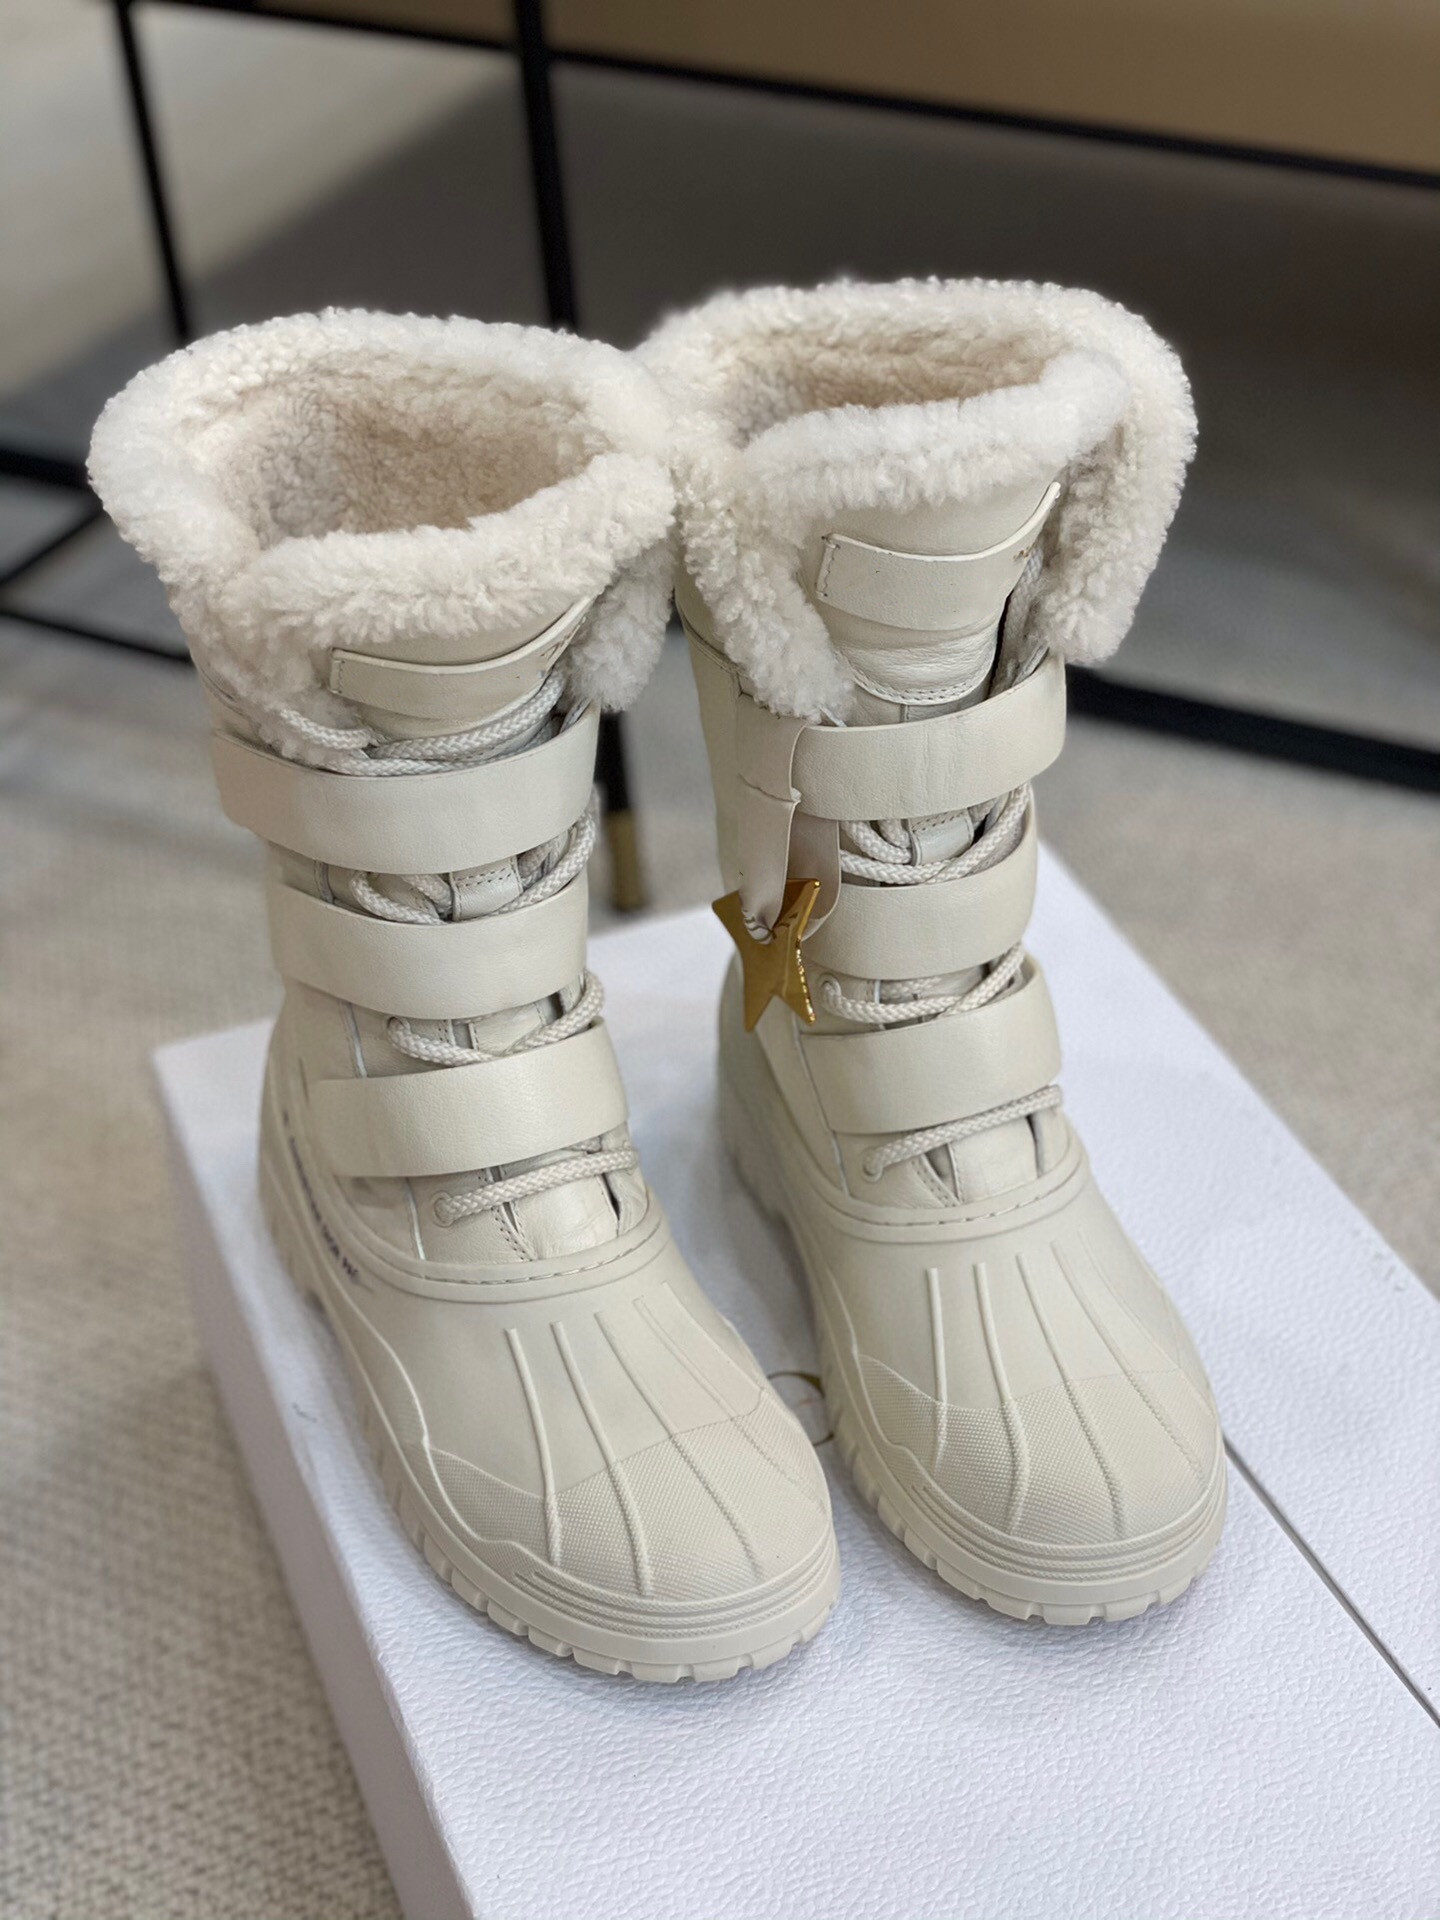 

Classics Winter Snow boot Real Fur Slides Leather Waterproof Warm Knee High Fashion booties Boots Designer, Box